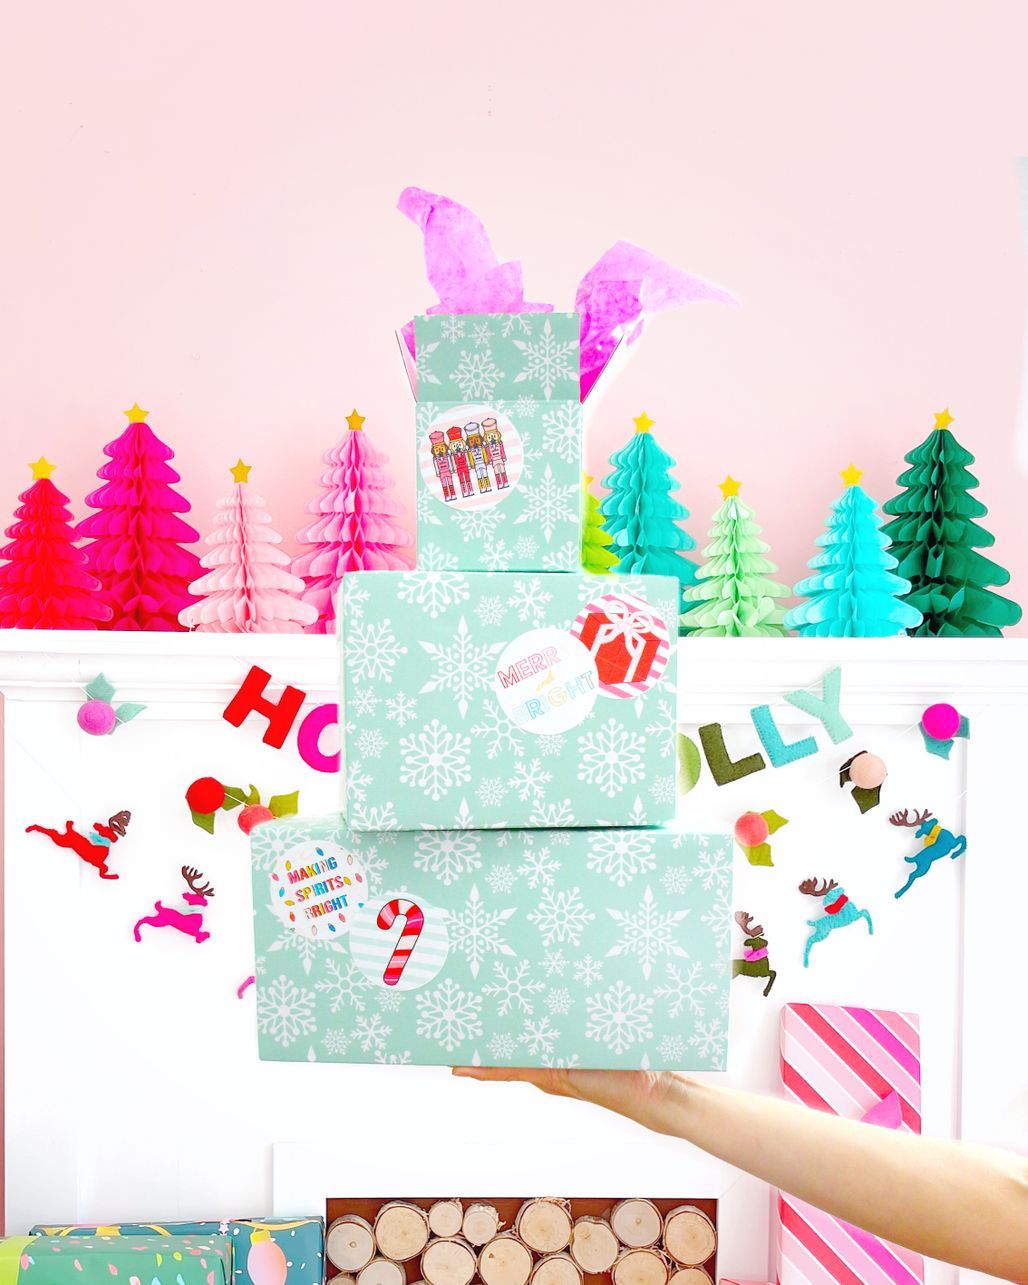 Wrap It Right: Jazz It Up With Unique Present Toppers